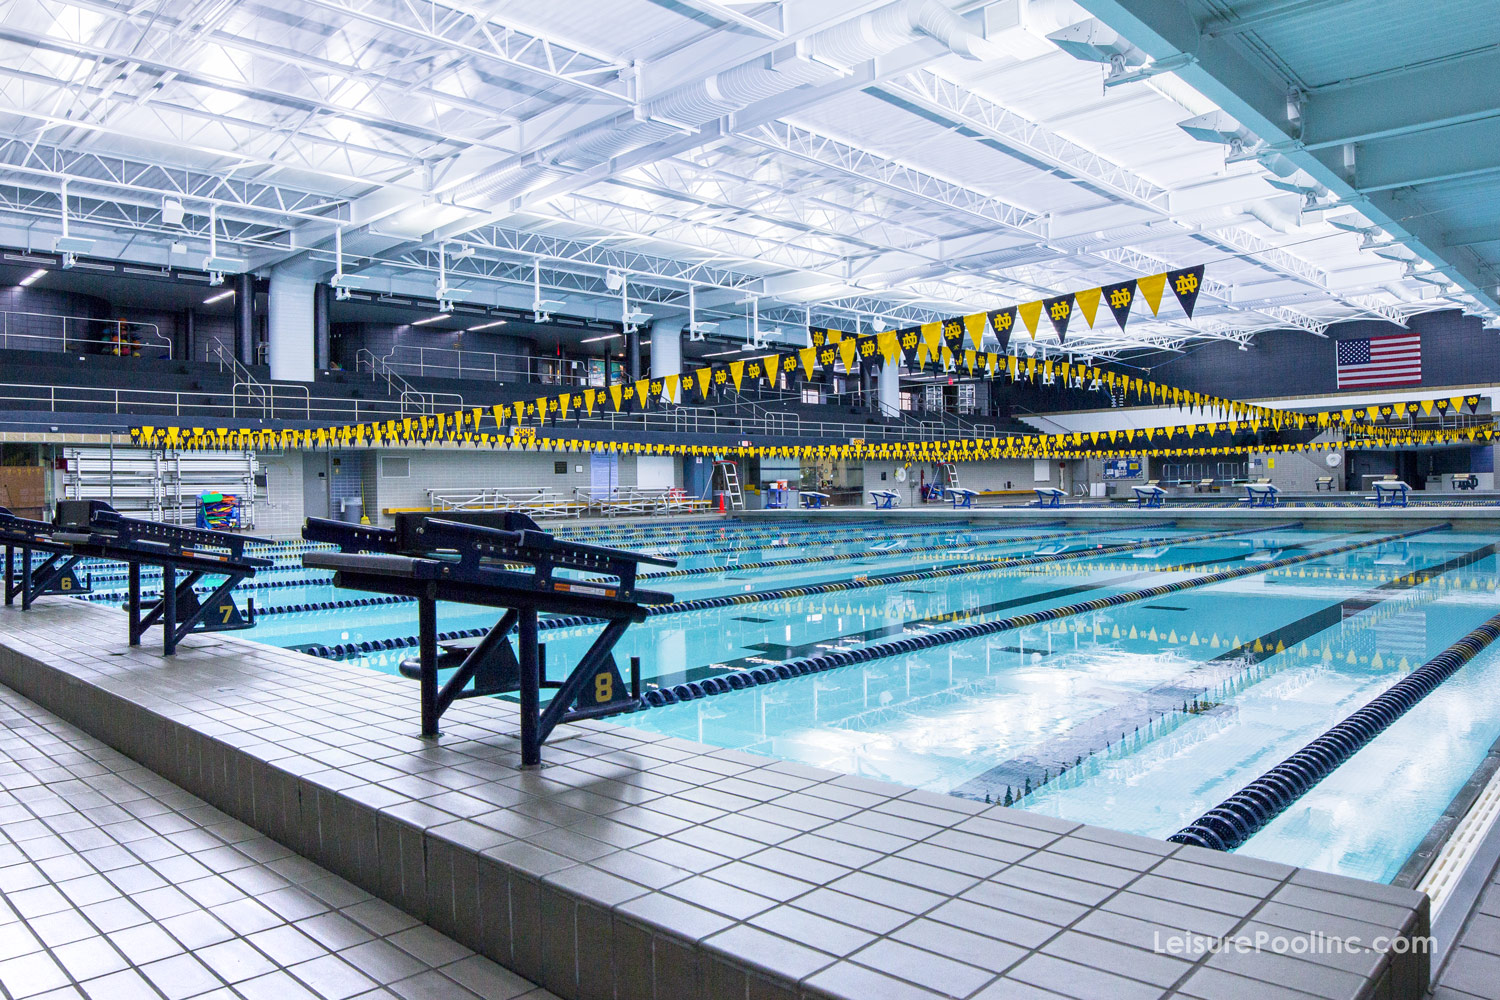 Commercial Aquatic Center Services - Photo by B. Rogers